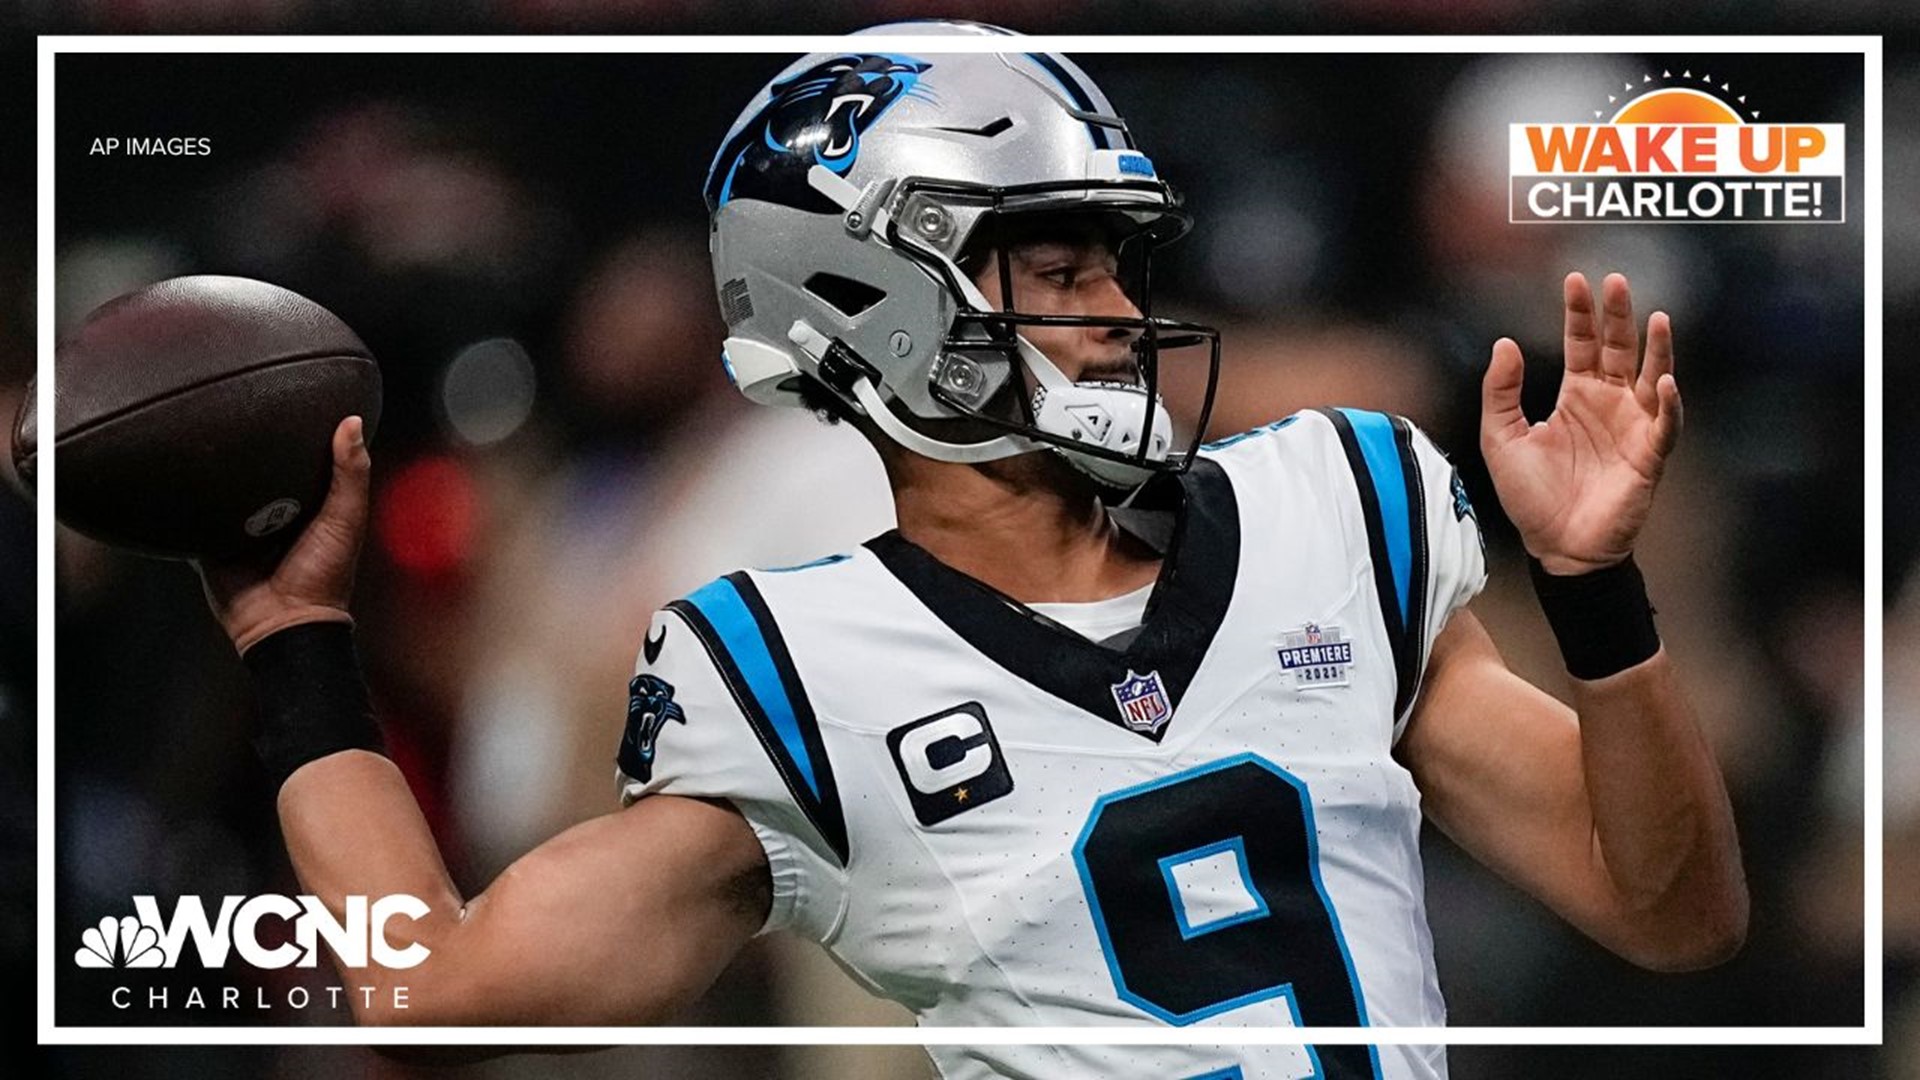 Bryce Young's home debut will be under the lights as the Panthers host New Orleans on Monday Night Football in Week 2.